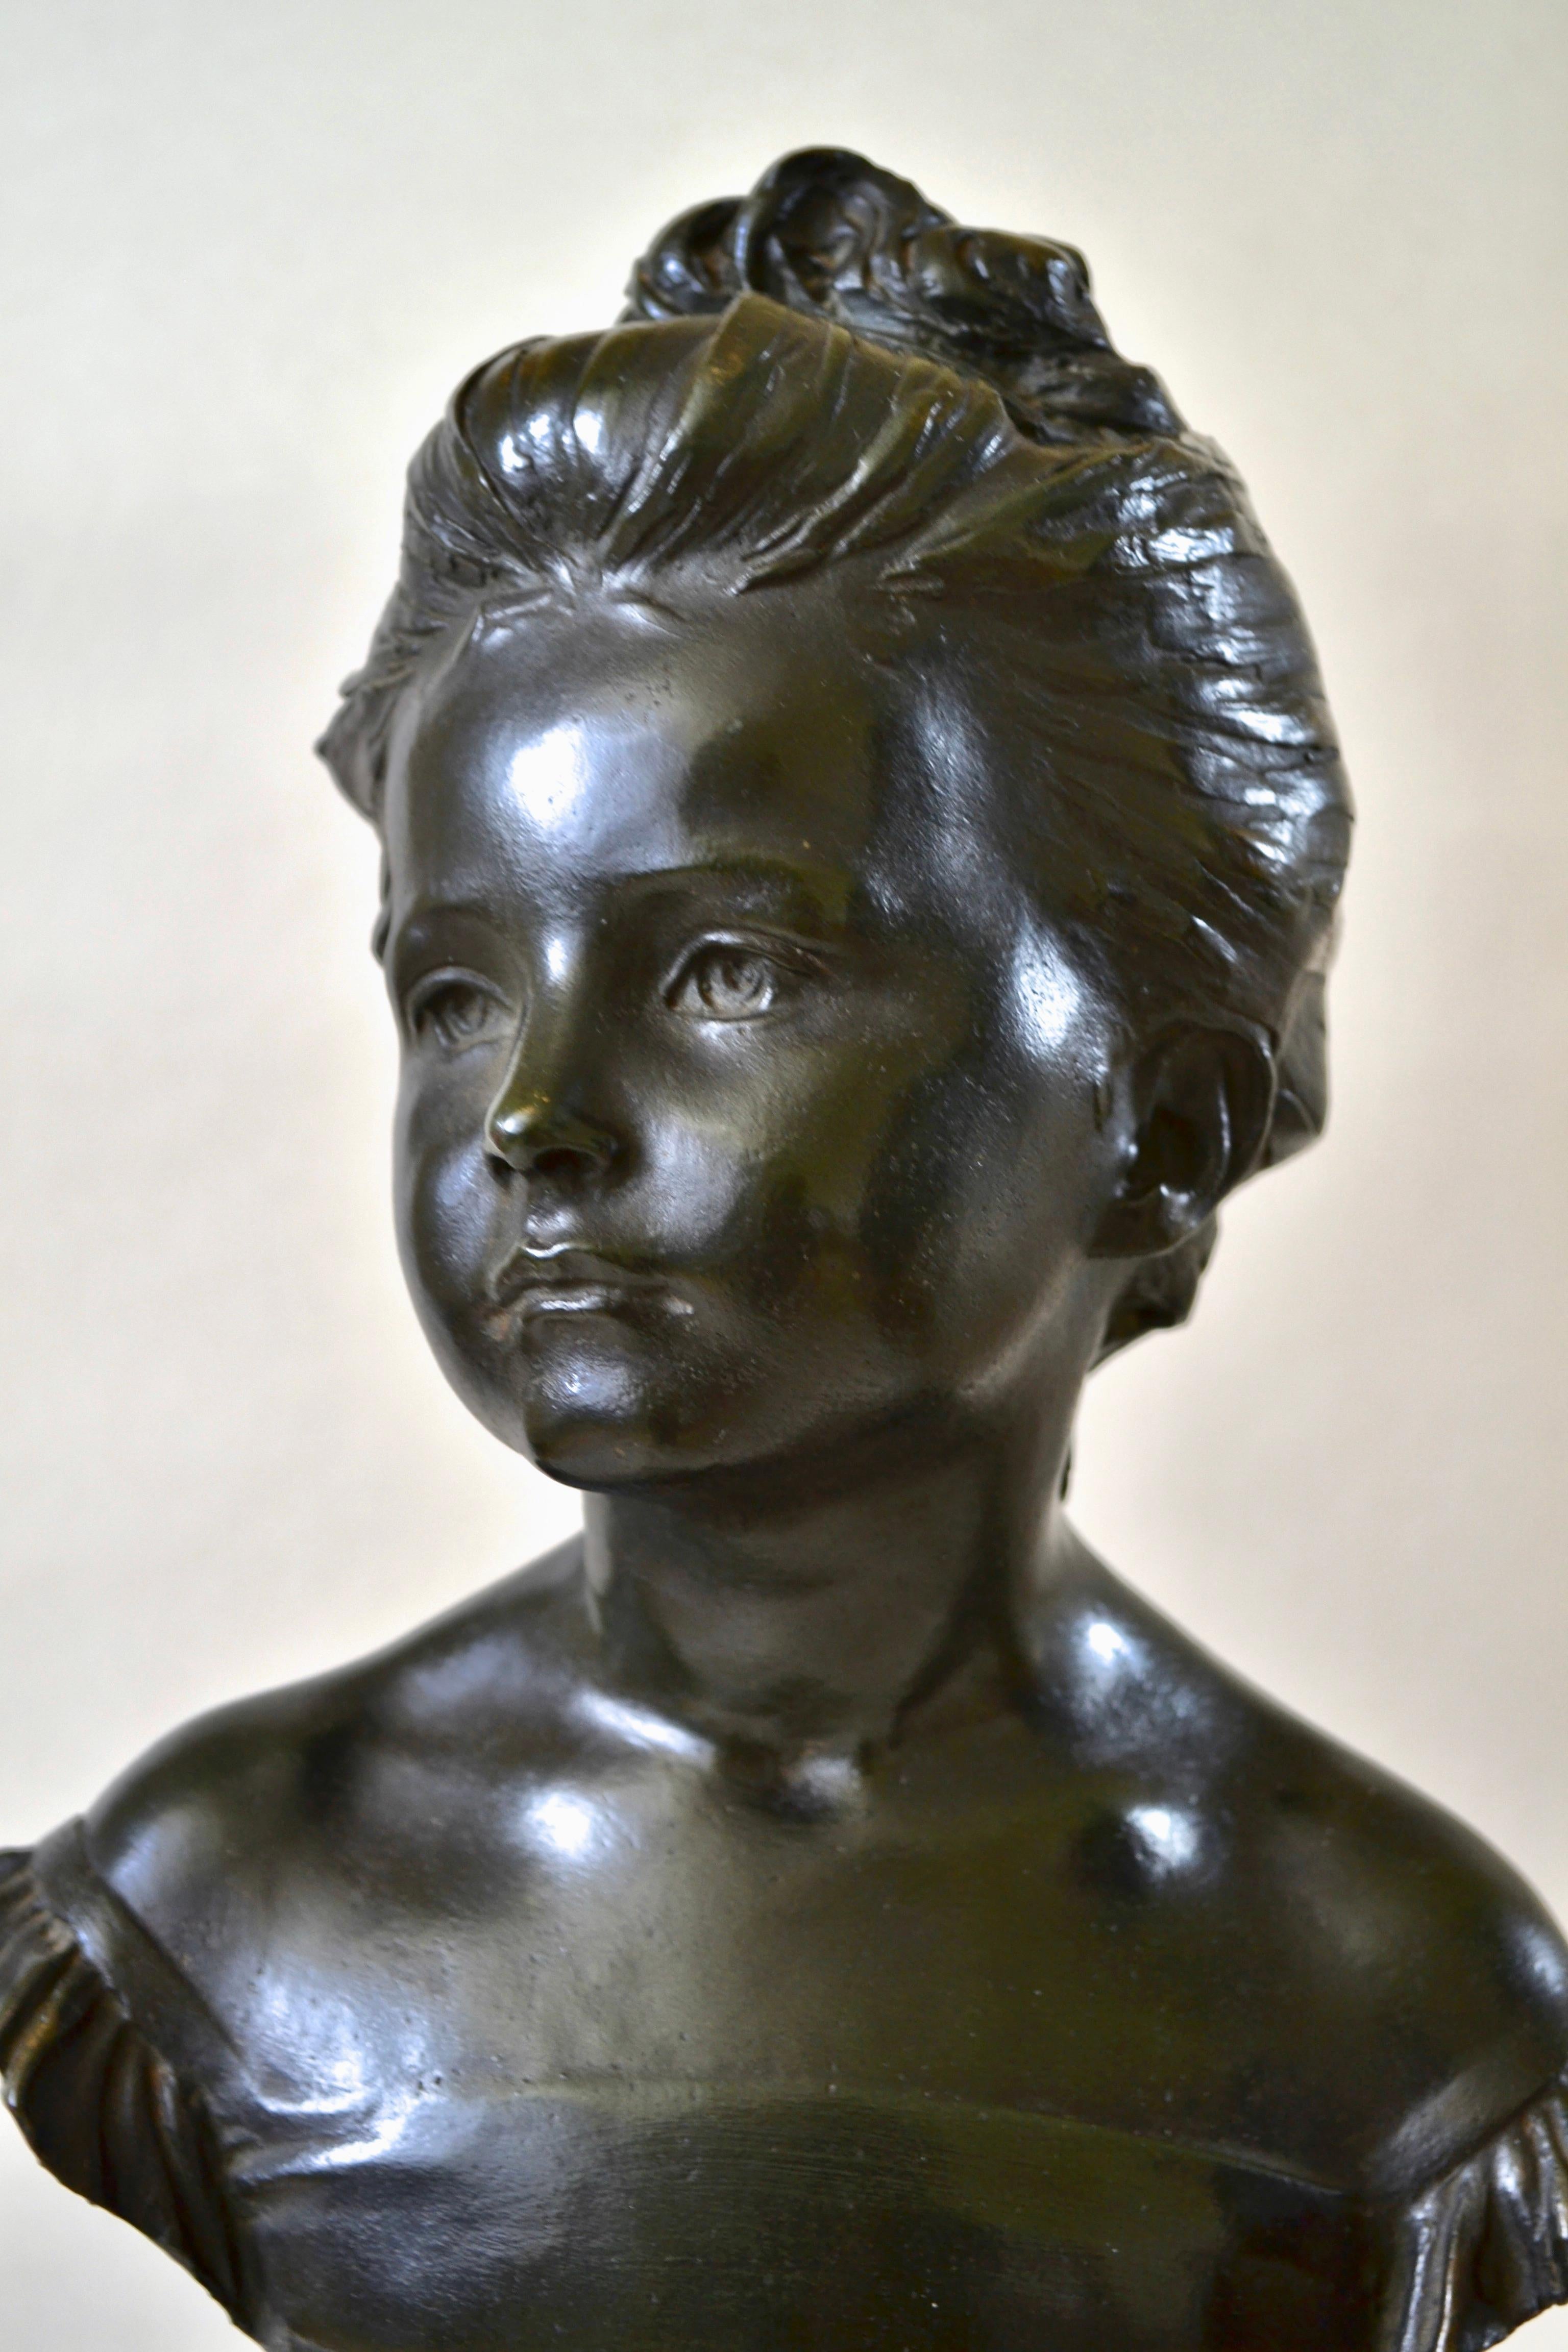 Alfred Drury RA Figurative Sculpture - The Age of Innocence - New Sculpture bronze bust by Alfred Drury